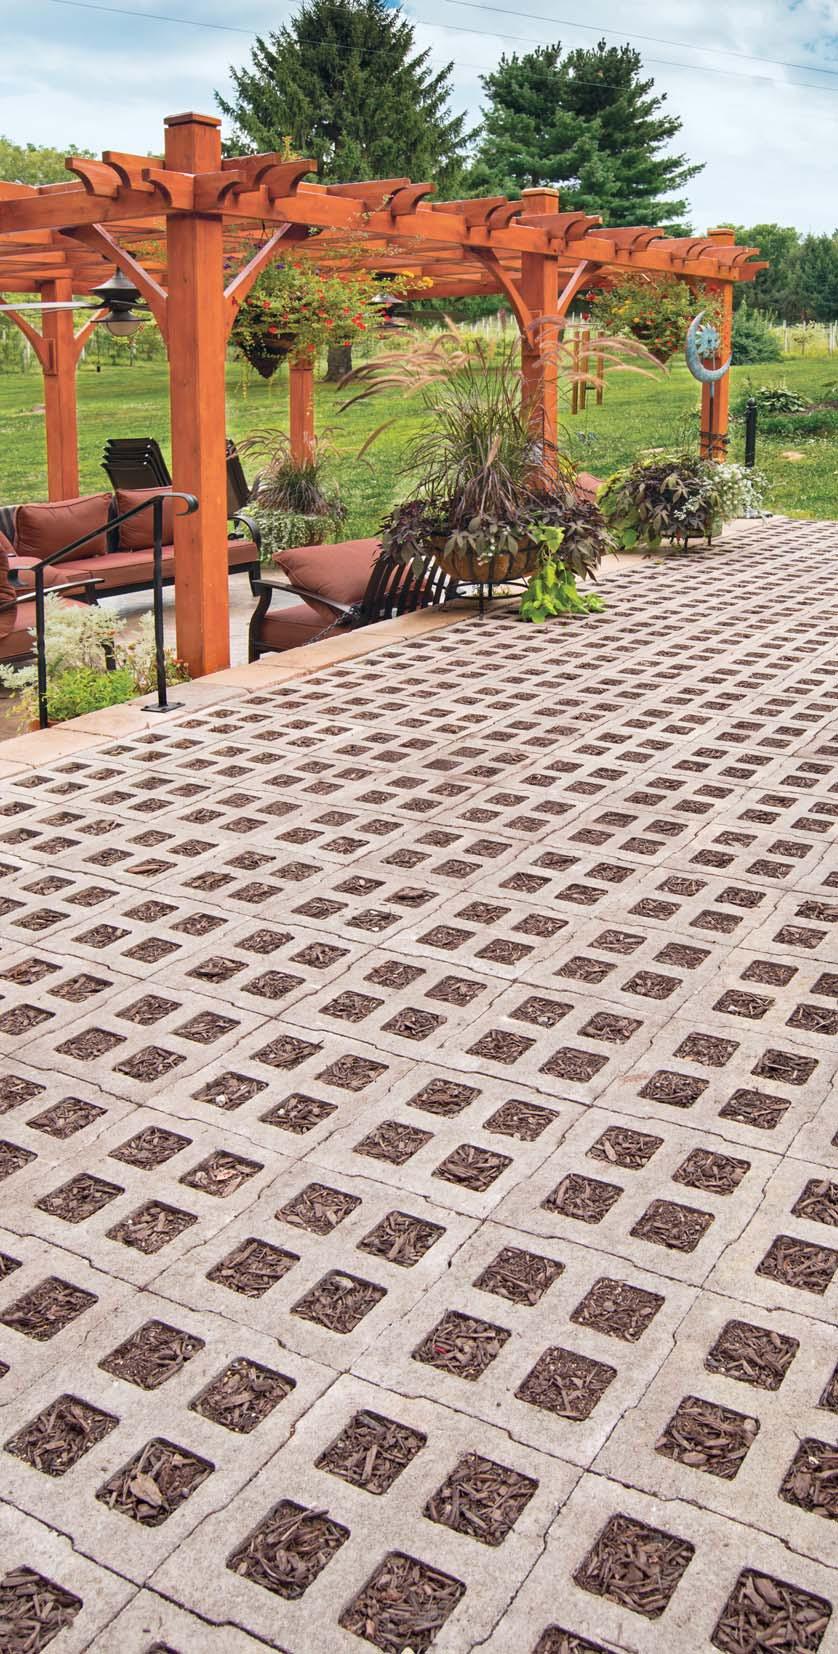 Hanover Architectural Products has participated in the development of concrete unit paver systems for over 40 years, as they became an integral part of architectural design.